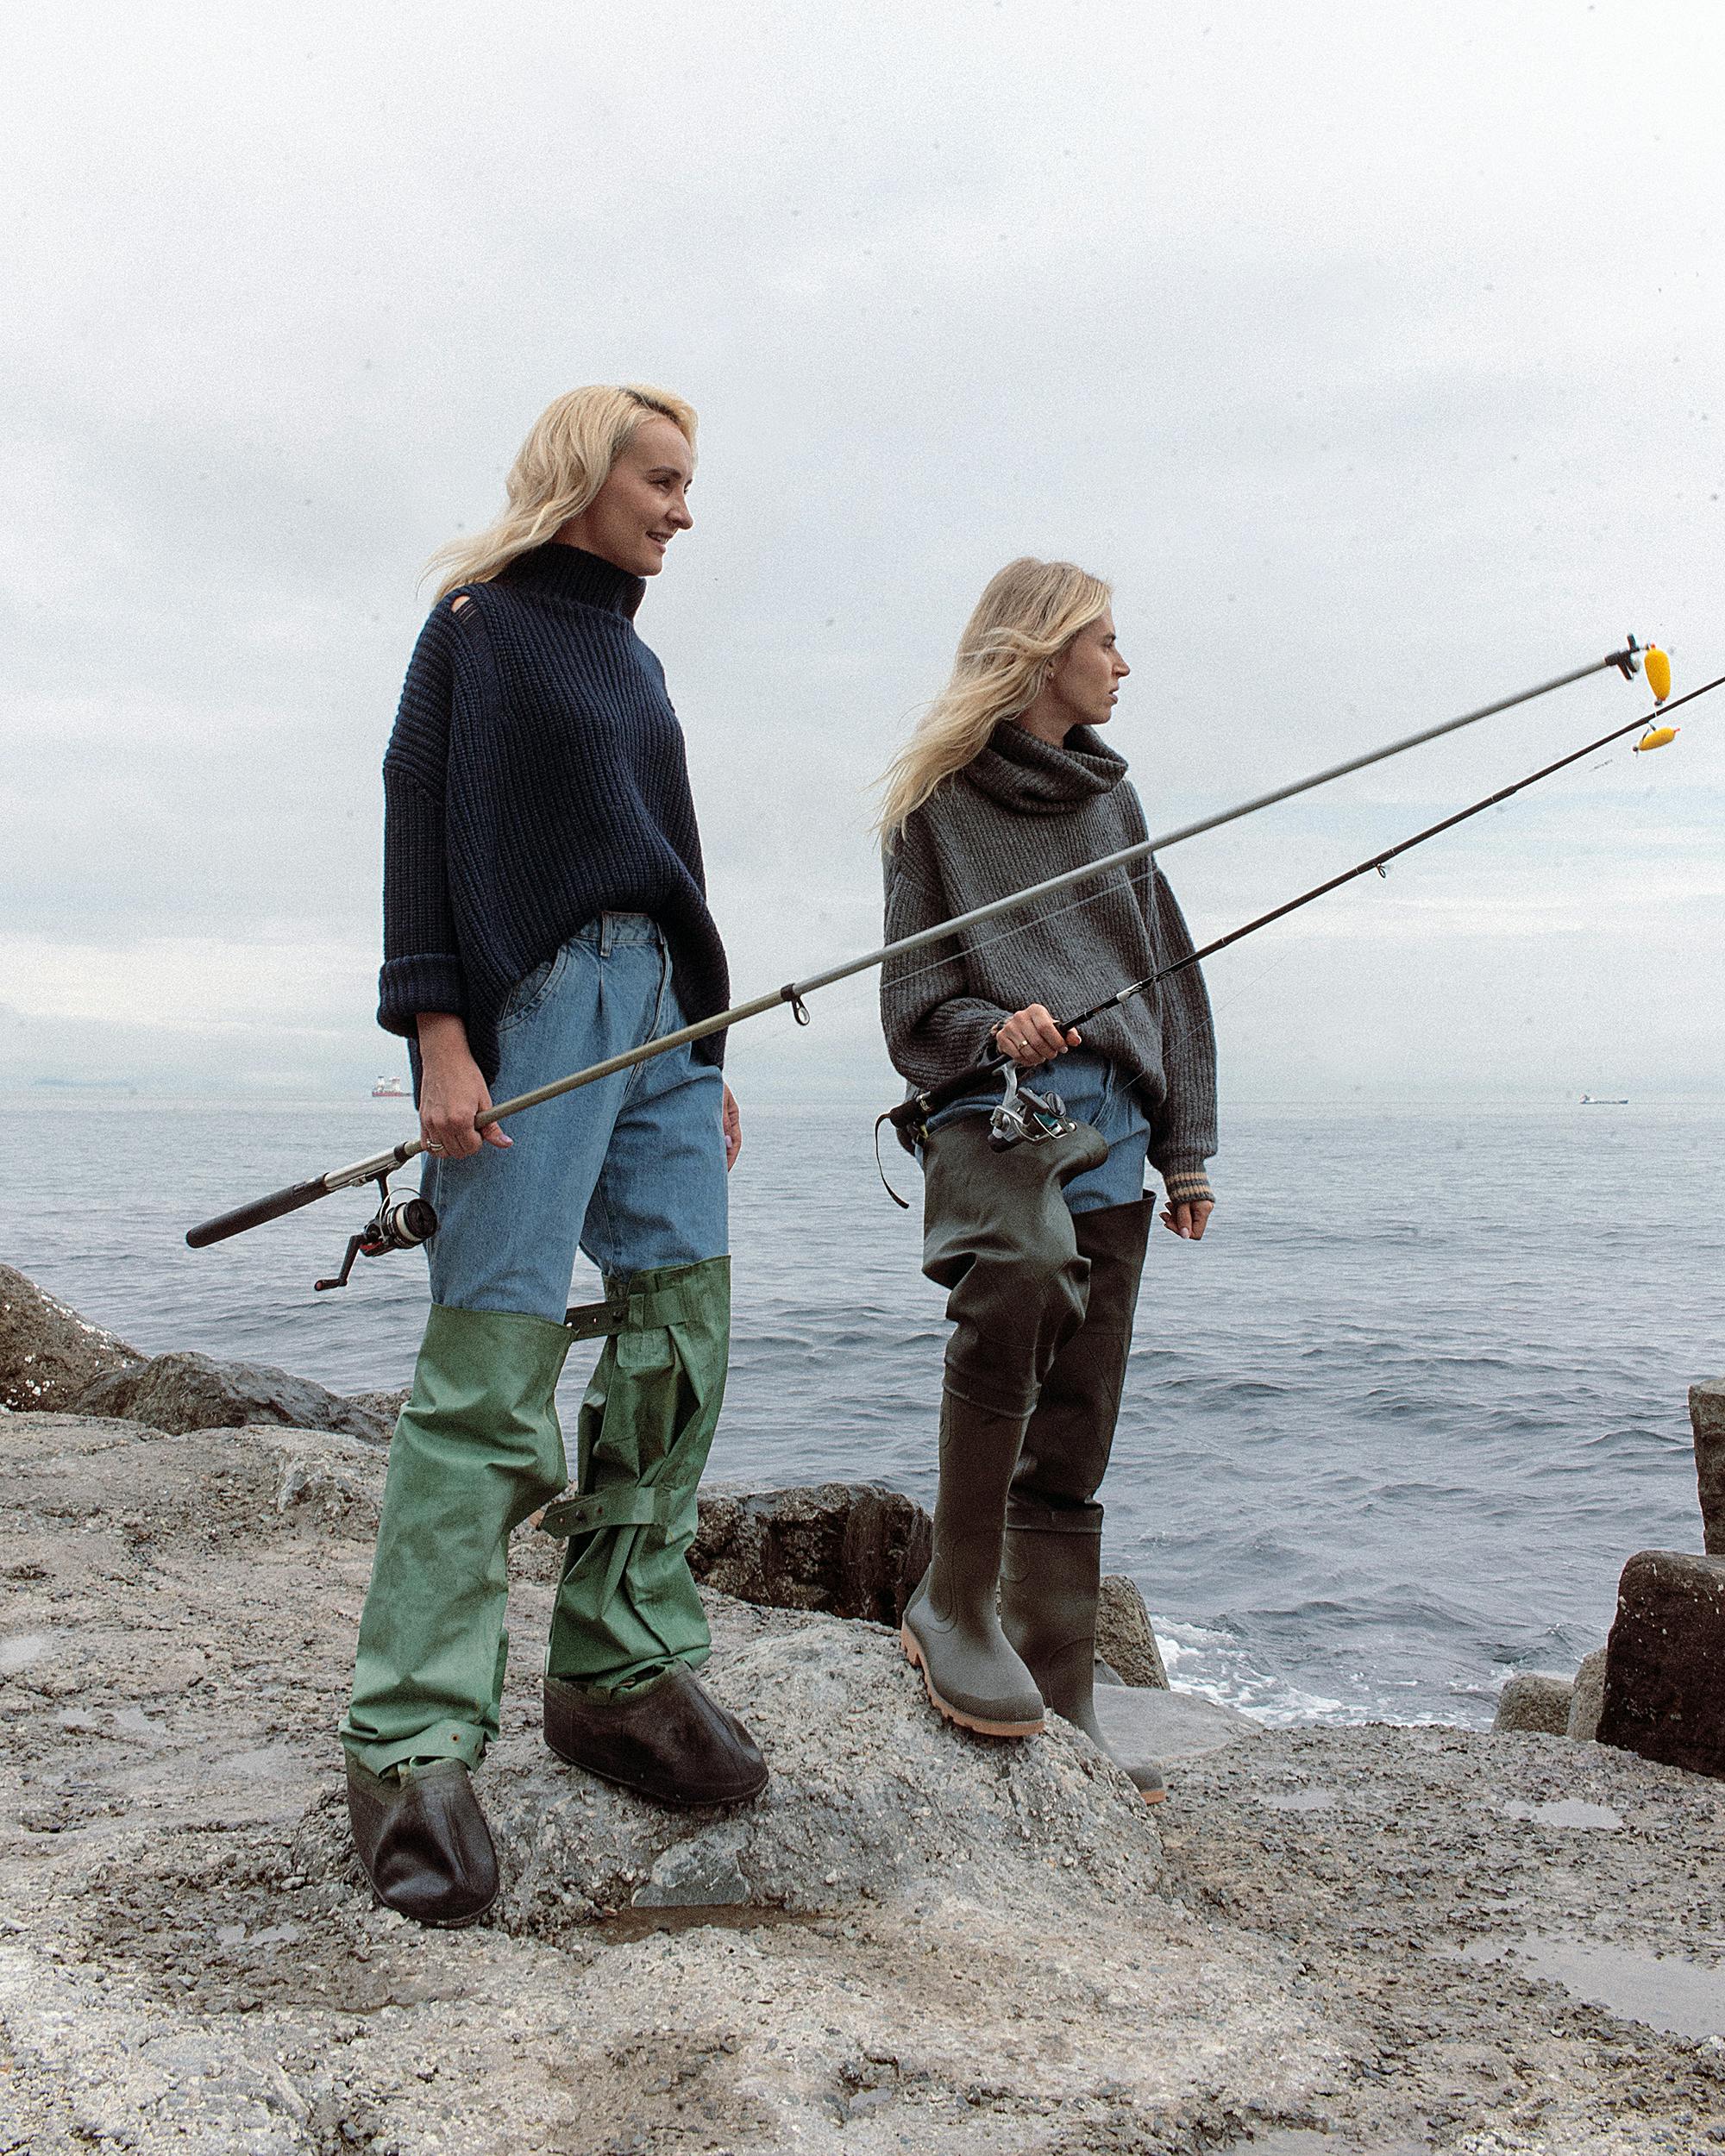 Women Wearing Rubber Boots Holding Fishing Rods · Free Stock Photo